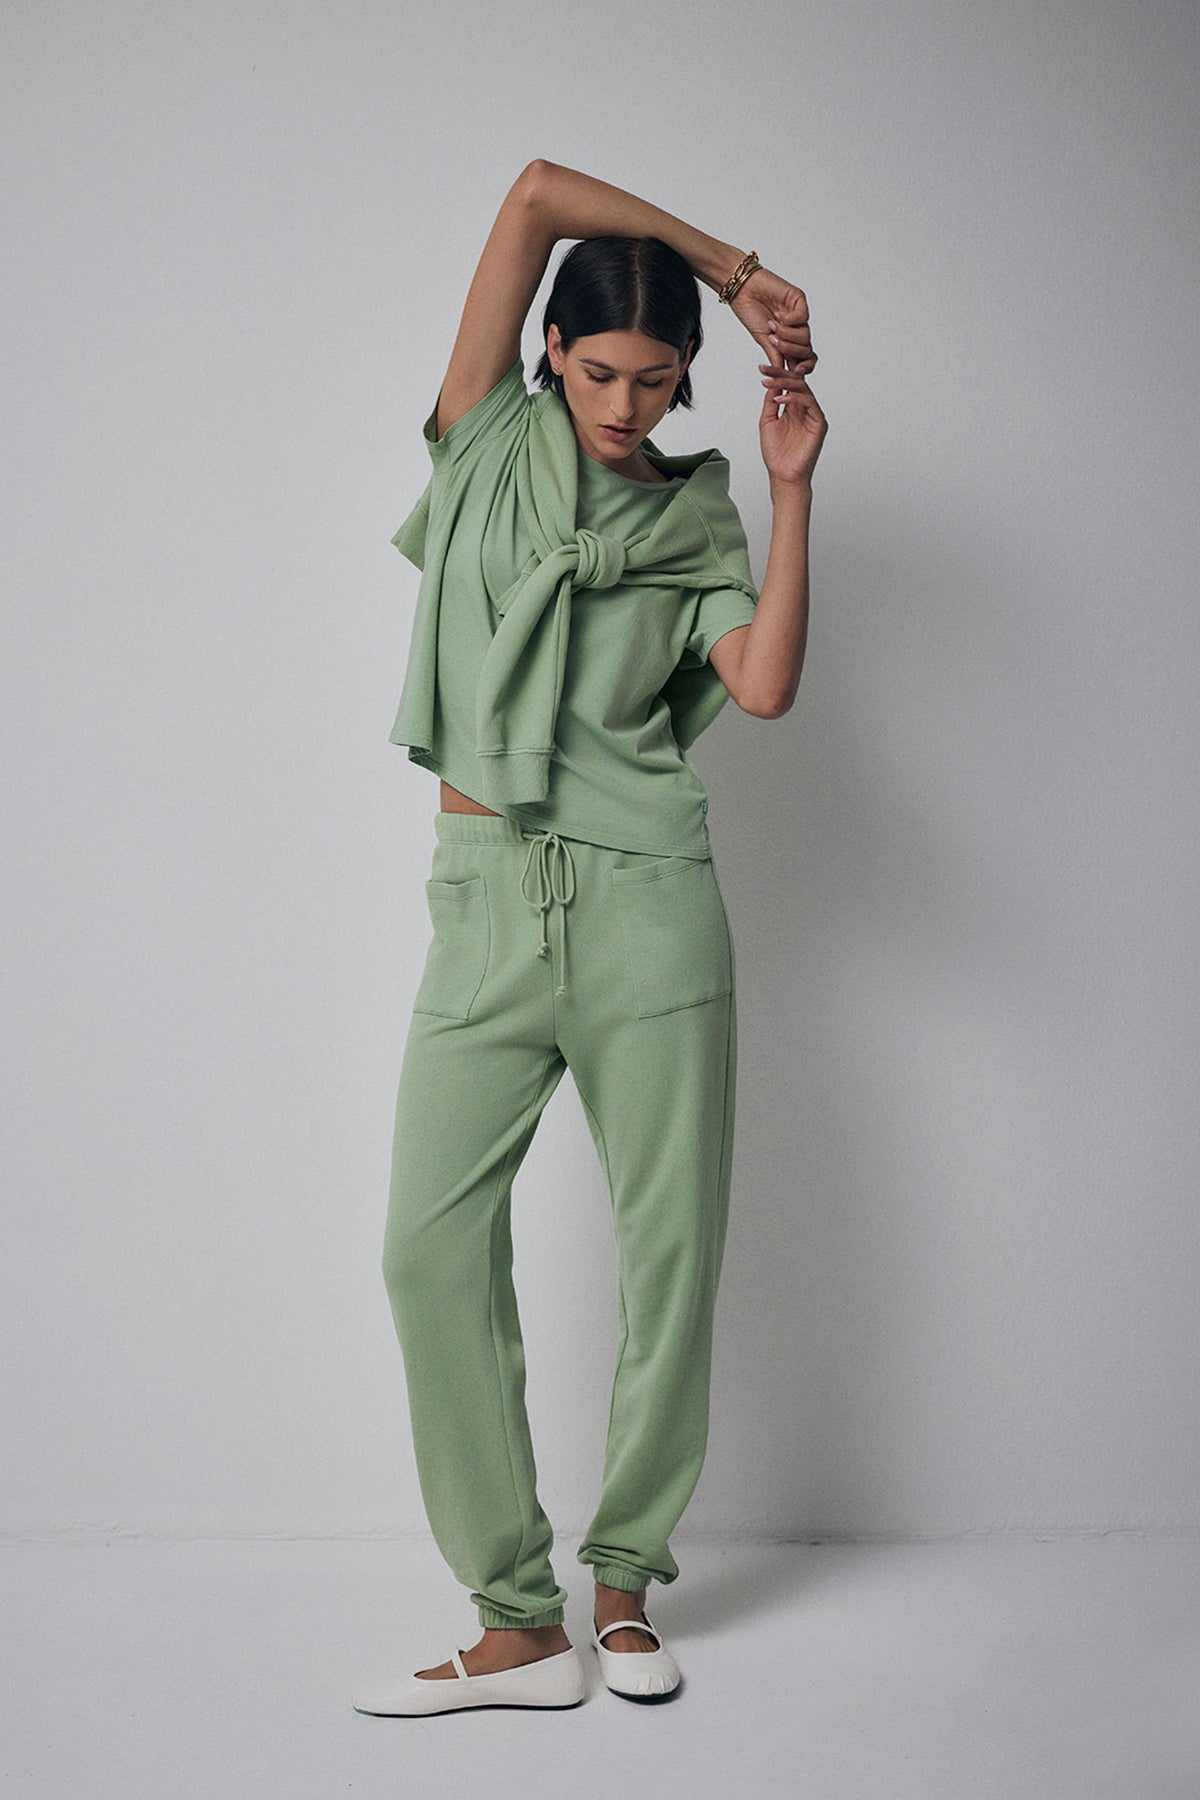 A model wearing a Velvet by Jenny Graham Ynez Sweatshirt in organic cotton green and joggers.-36212432601281